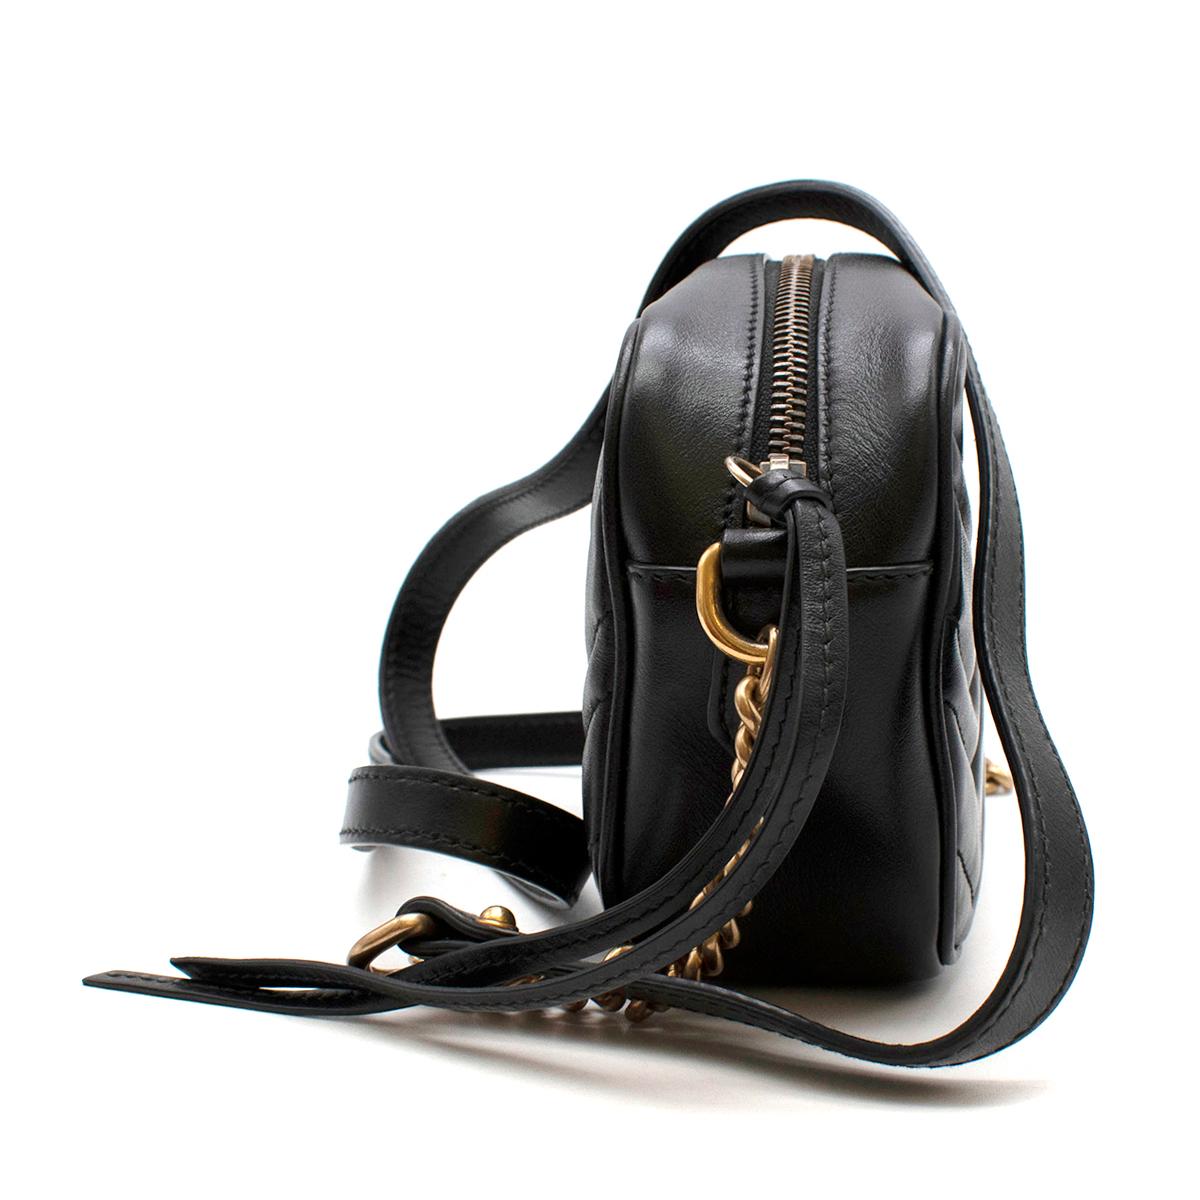 Gucci Black Leather GG Marmont Matelasse Mini Crossbody Bag

- Made of soft leather 
- GG Marmont gold-tone logo plaque
- Matelasse quilted design
- Embroidered logo to the rear
- Leather and chain-link shoulder strap
- Top zip fastening
- Internal